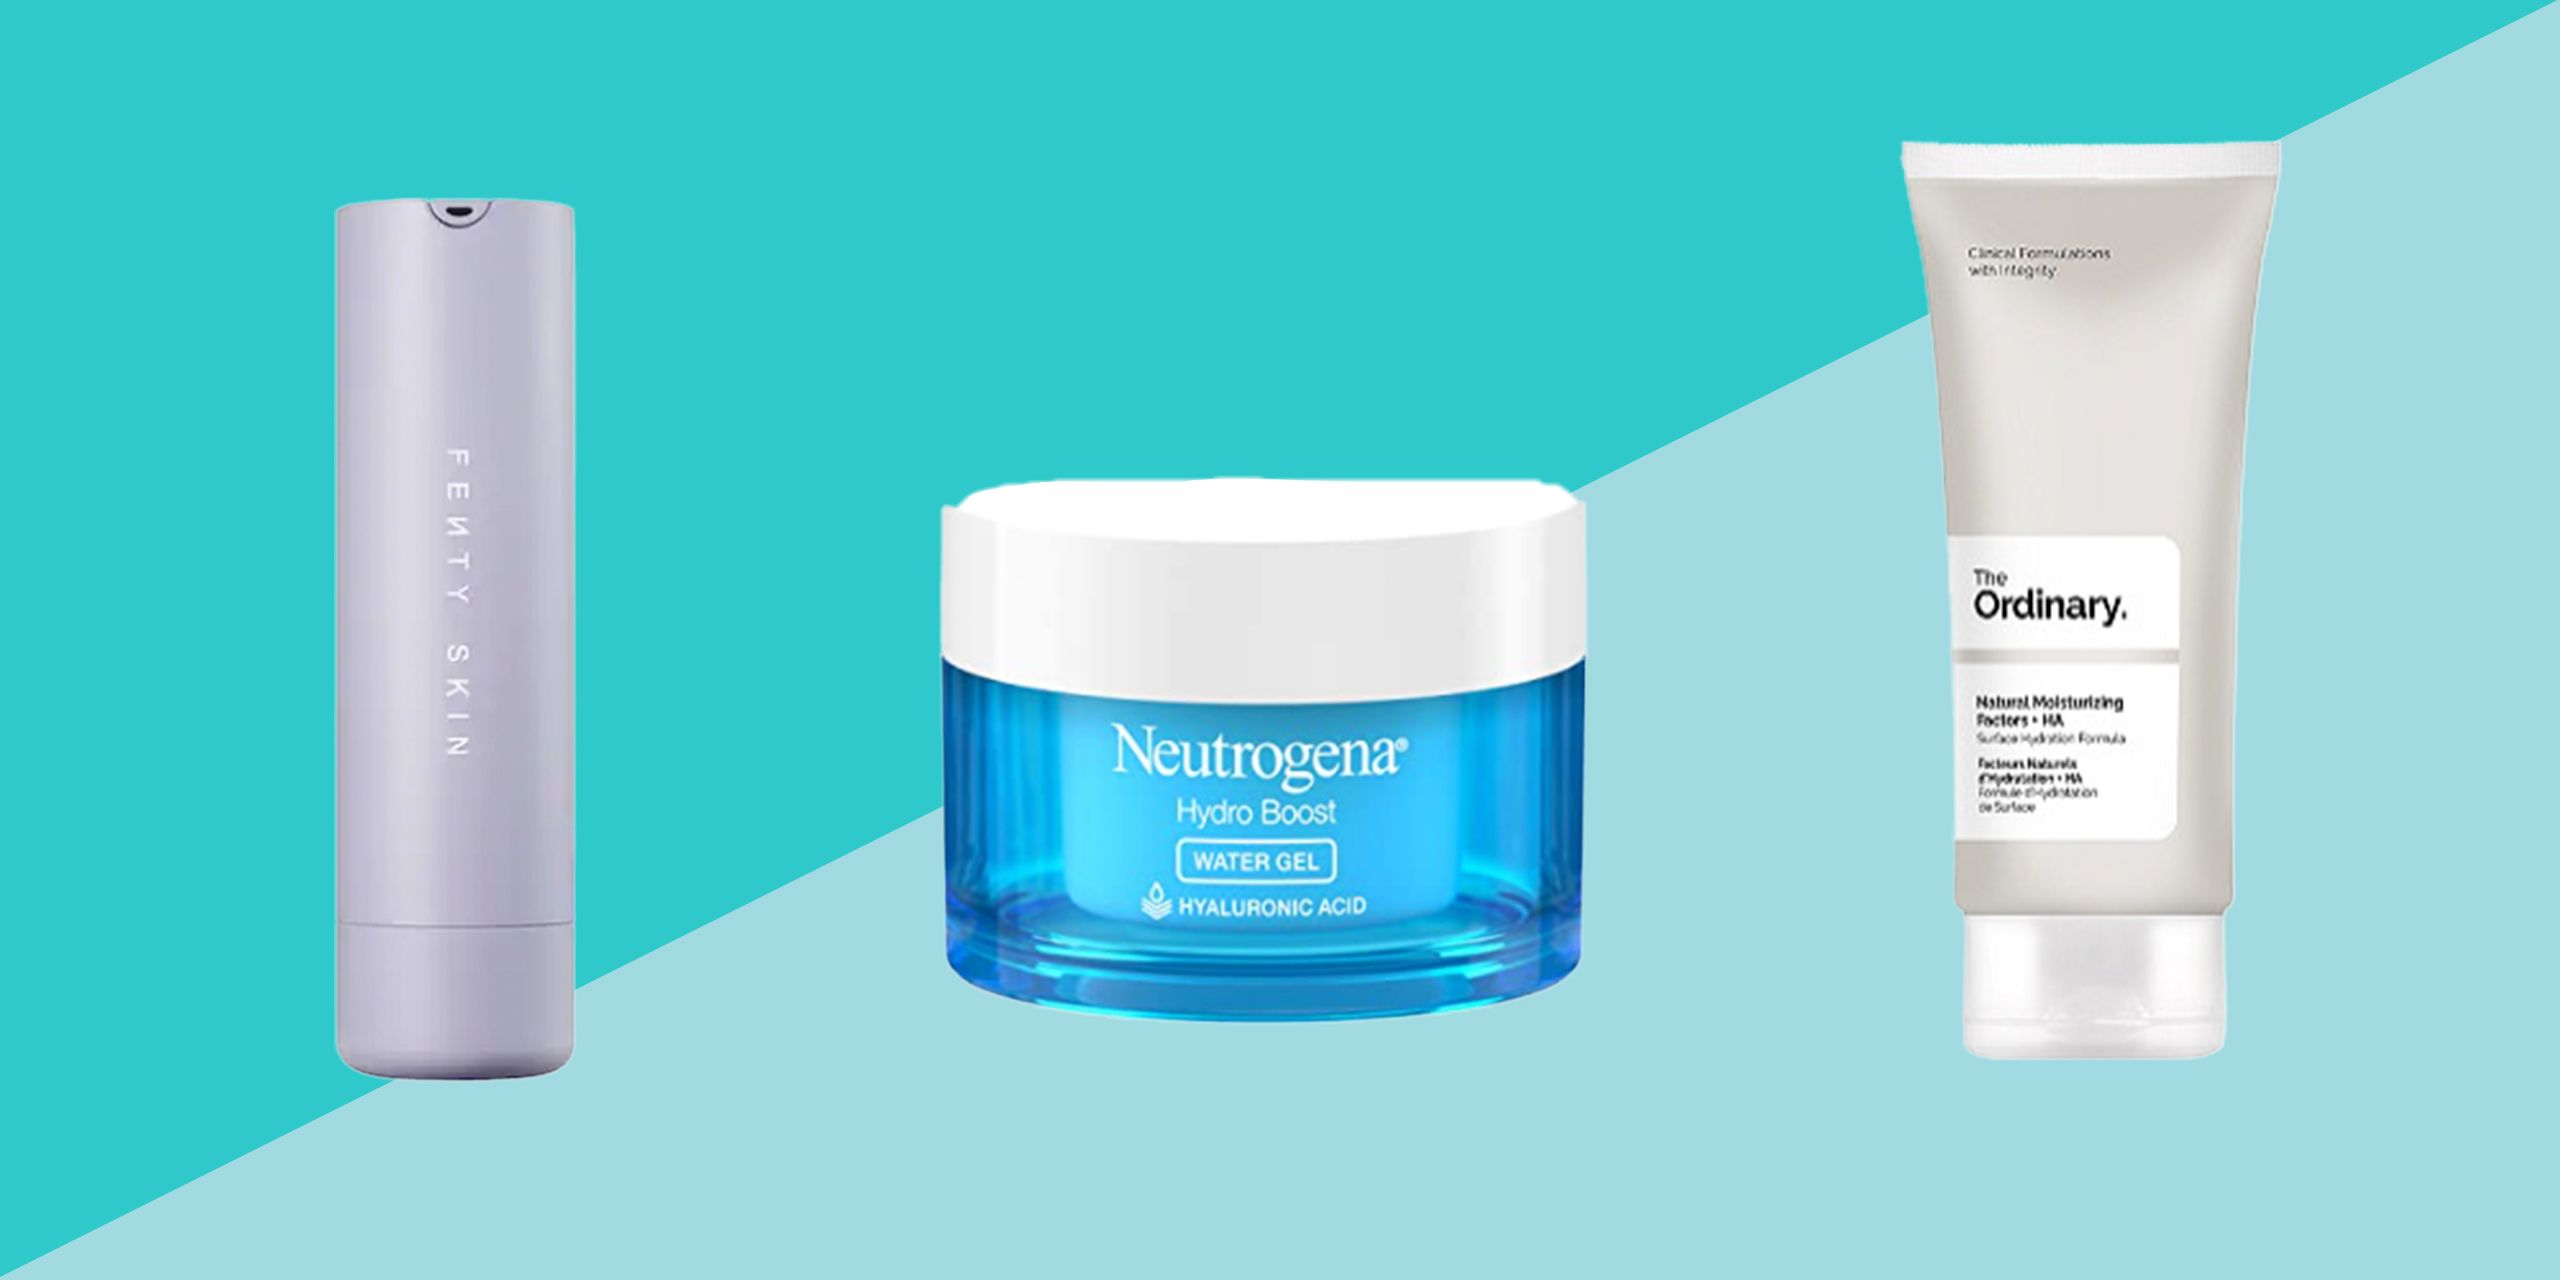 25 Best Moisturizers for Dry Skin 2022, According to Dermatologists